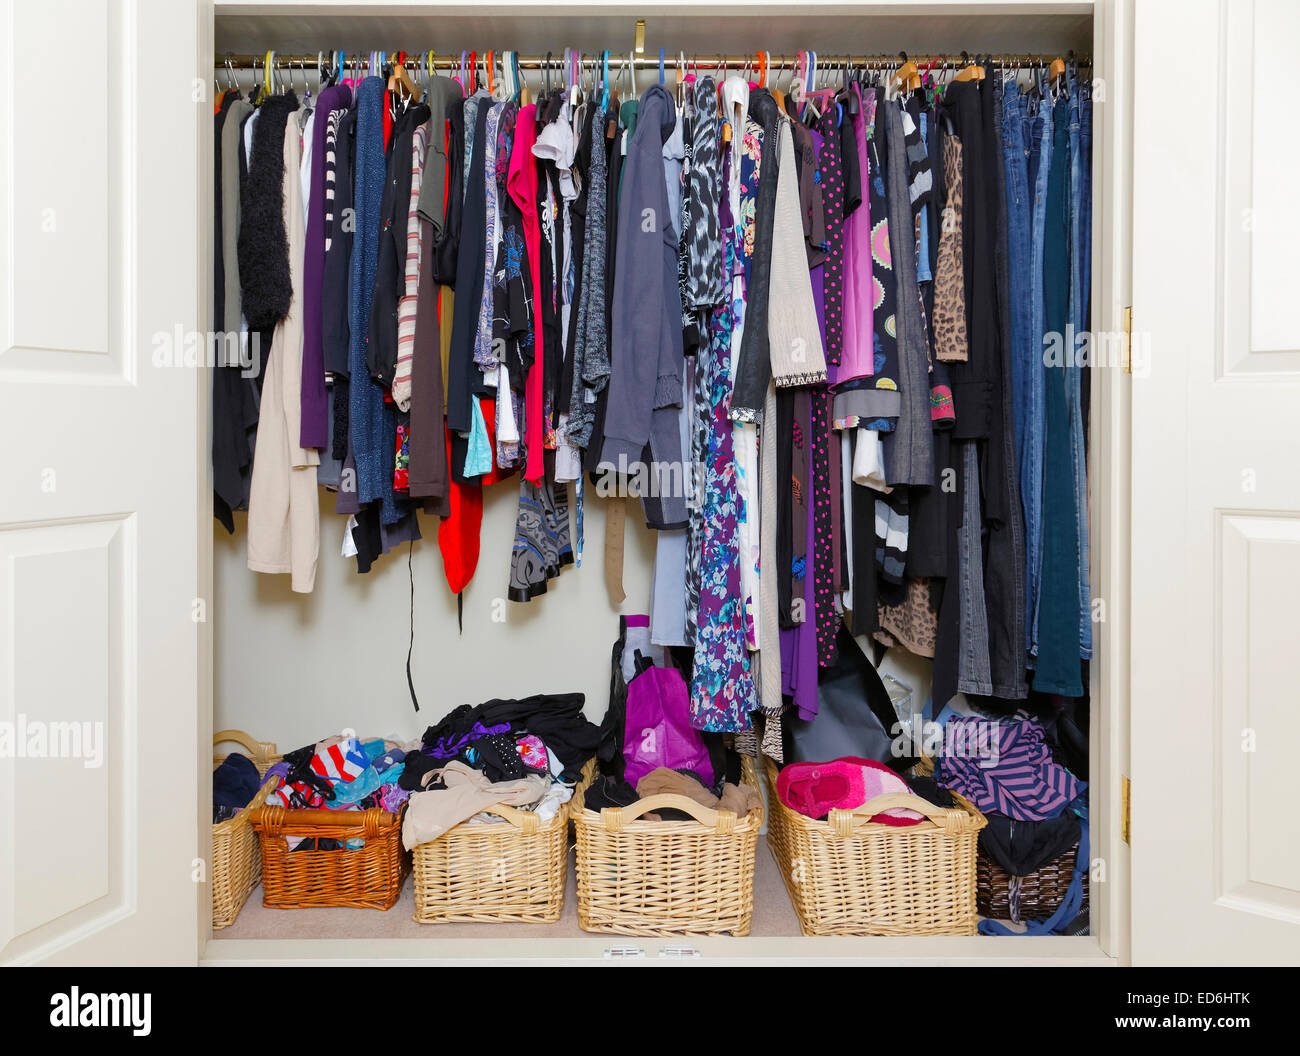 Pictures Of Women'S Clothes Closet 104